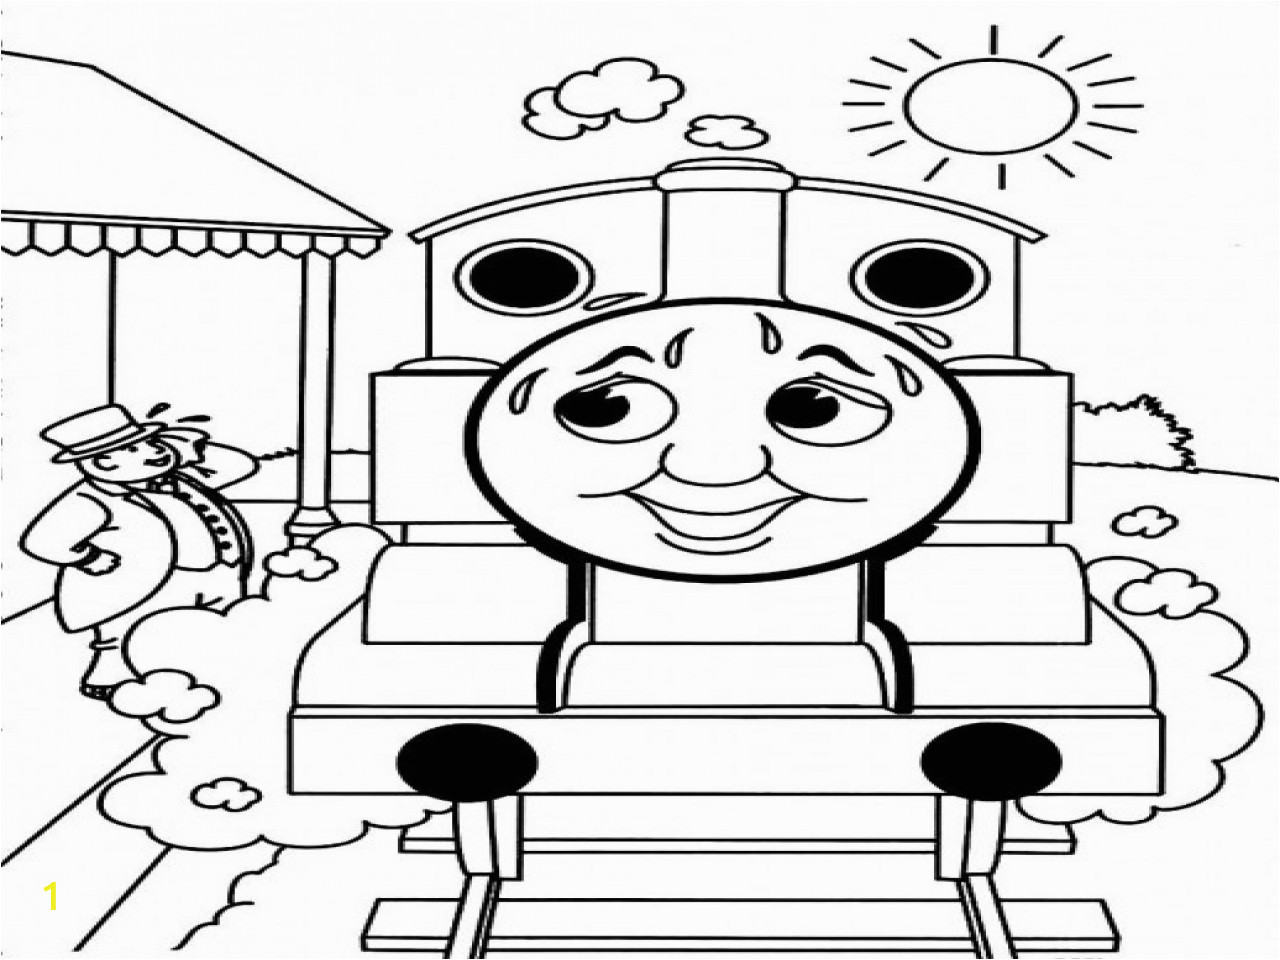 thomas birthday coloring pages